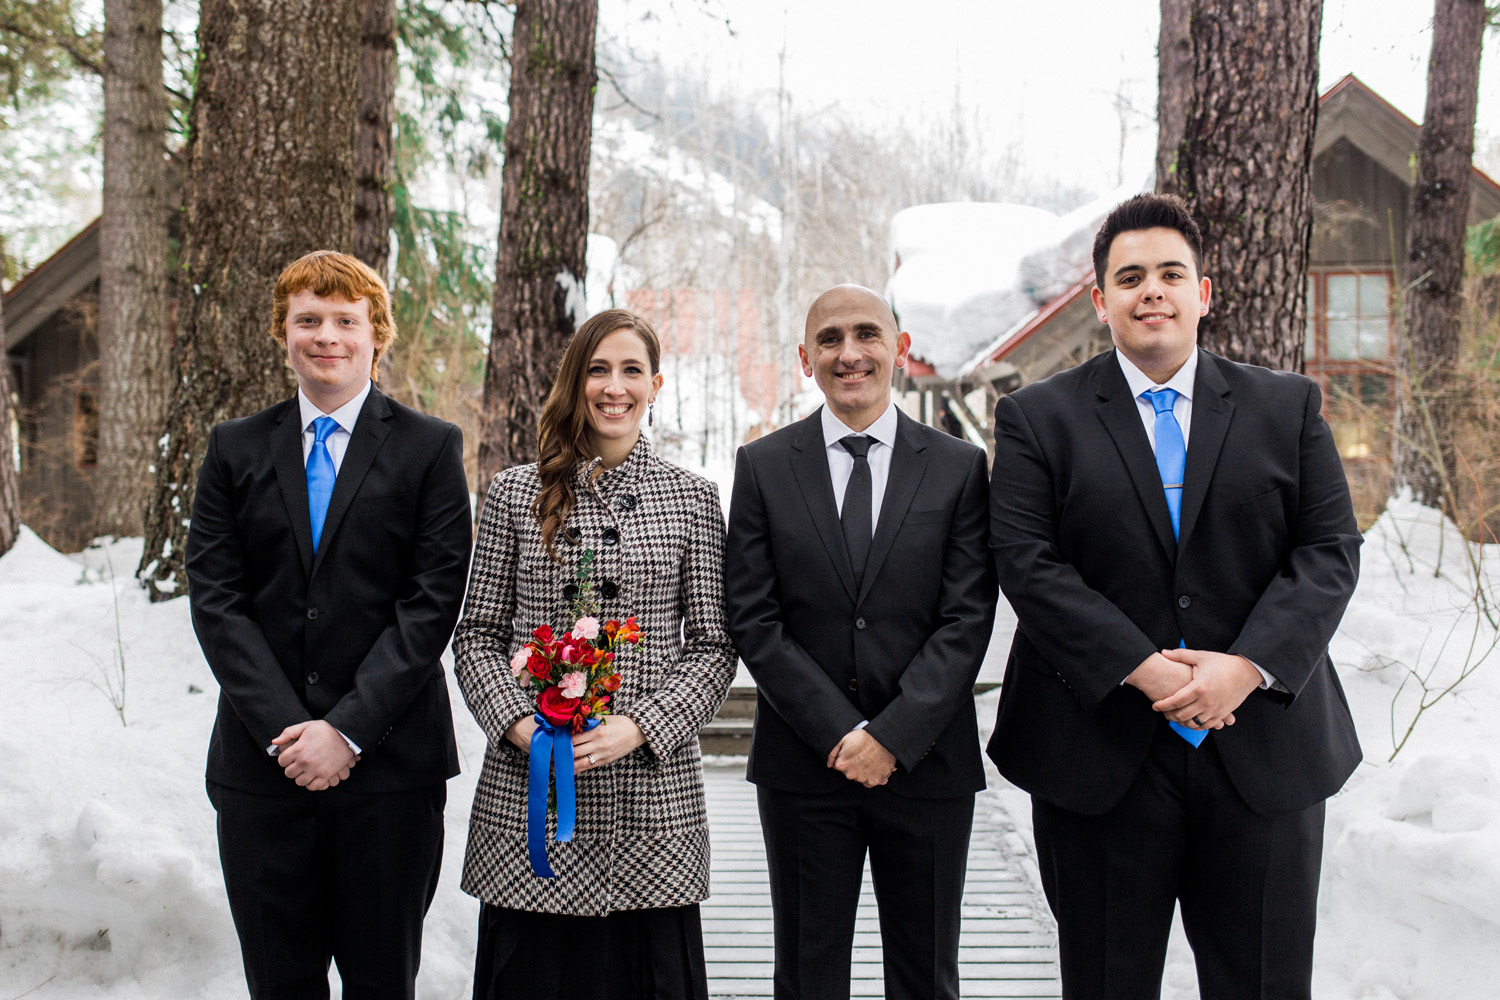 Bridal Party at the Sleeping Lady Mountain Resort in Leavenworth Winter wedding photography